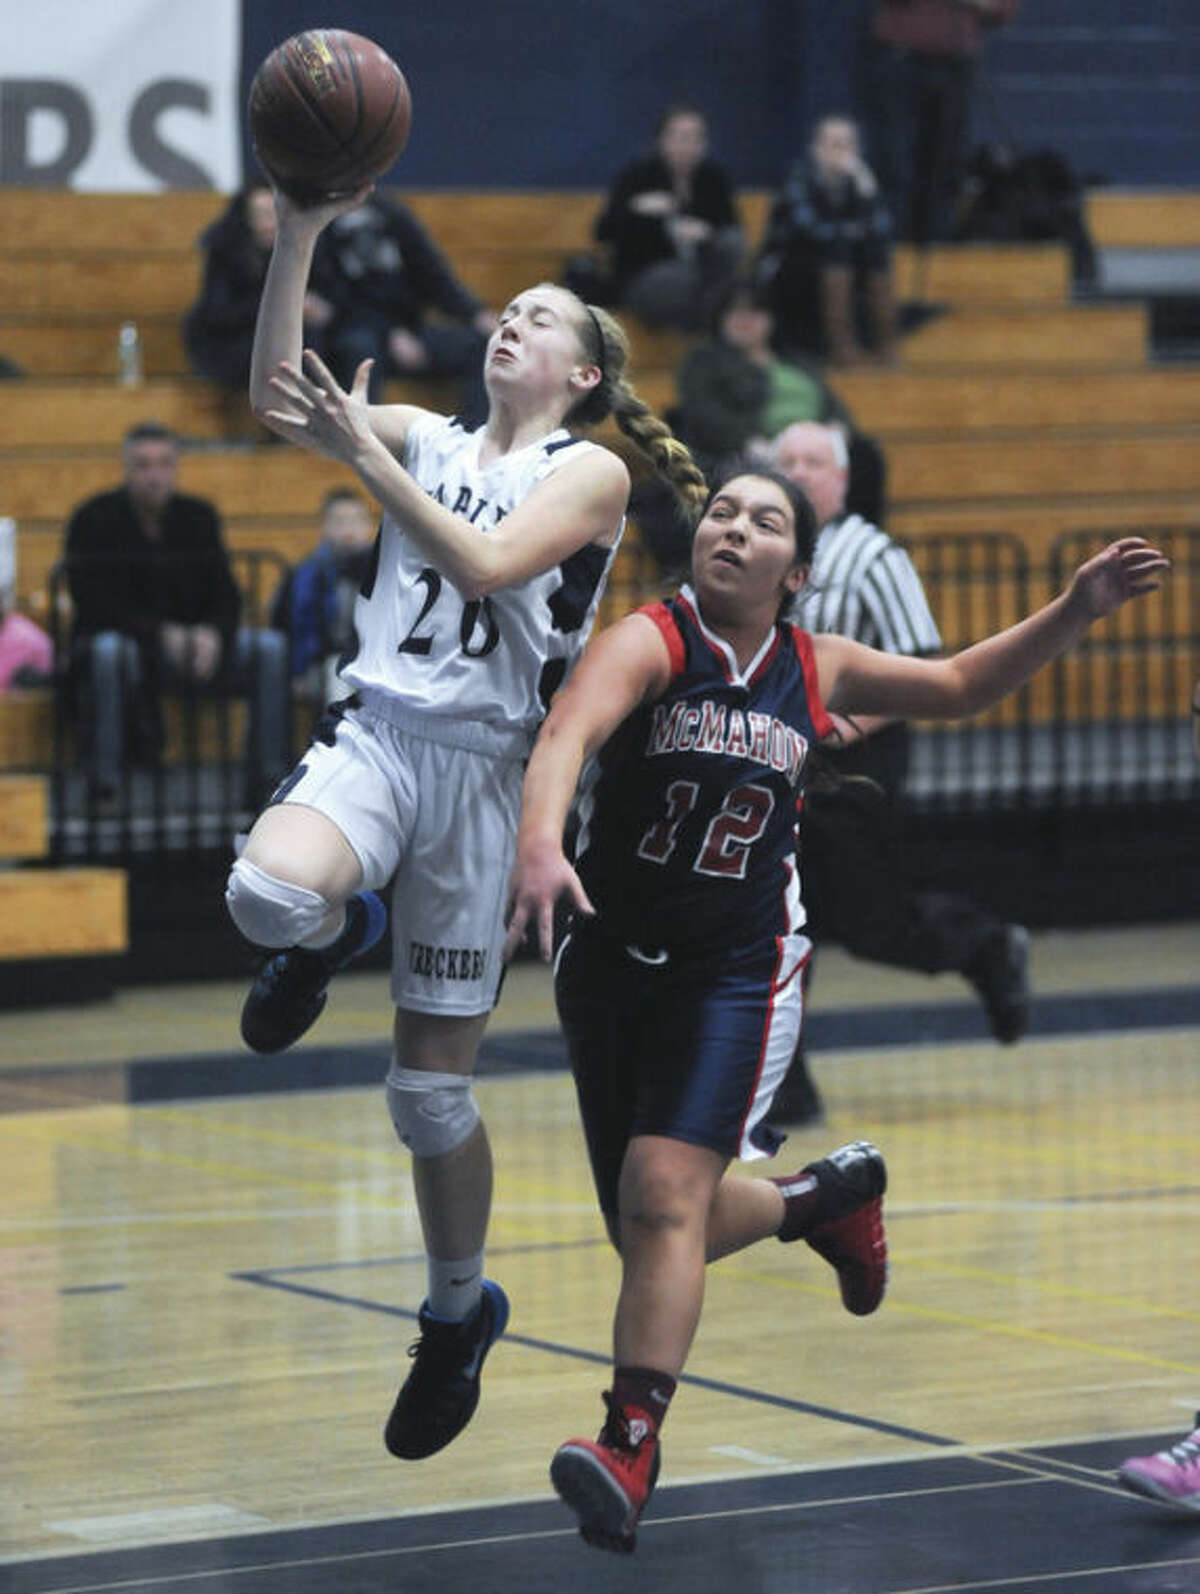 Hour photo/John Nash - Staples' Tessa Mall, left, moves in a lay up as Brien McMahon's Kyle Courtney arrives a little too late to stop her during Thursday's game in Westport.